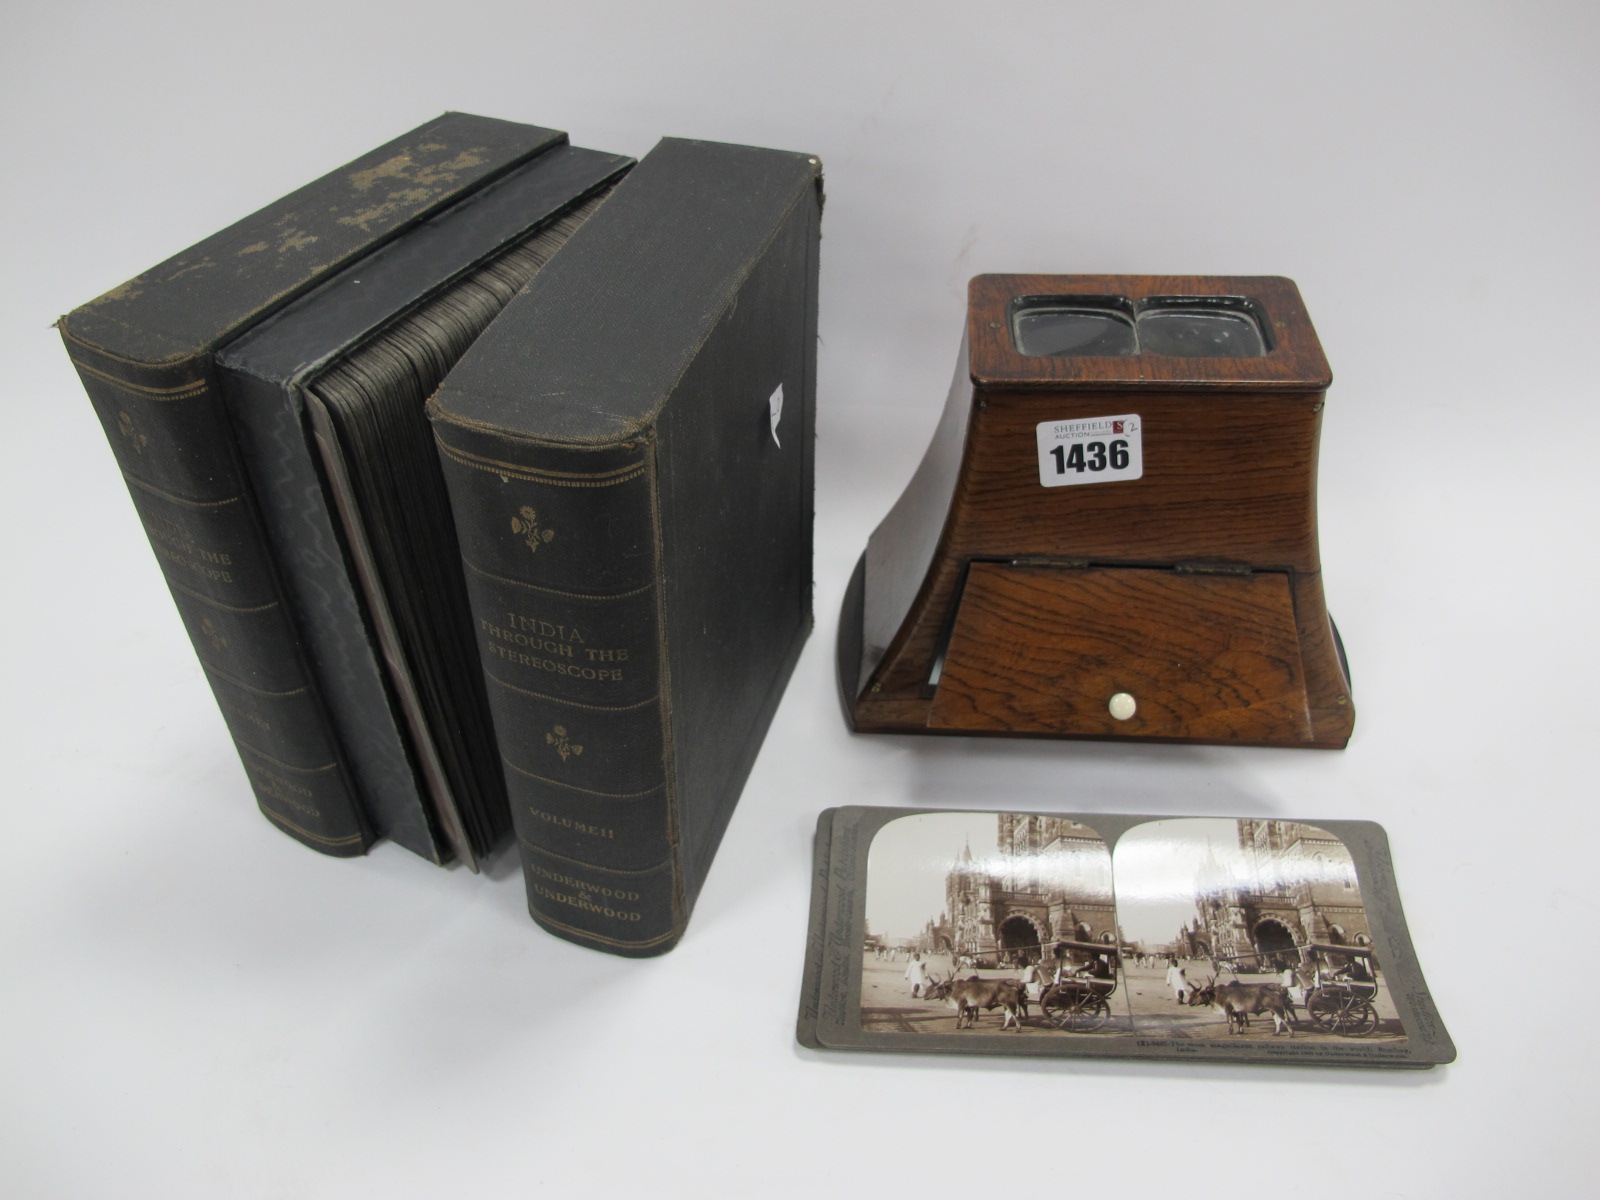 WITHDRAWN A Brewster Maple Veneer Stereoscopic Viewer, and Underwood & Underwood 'India through the